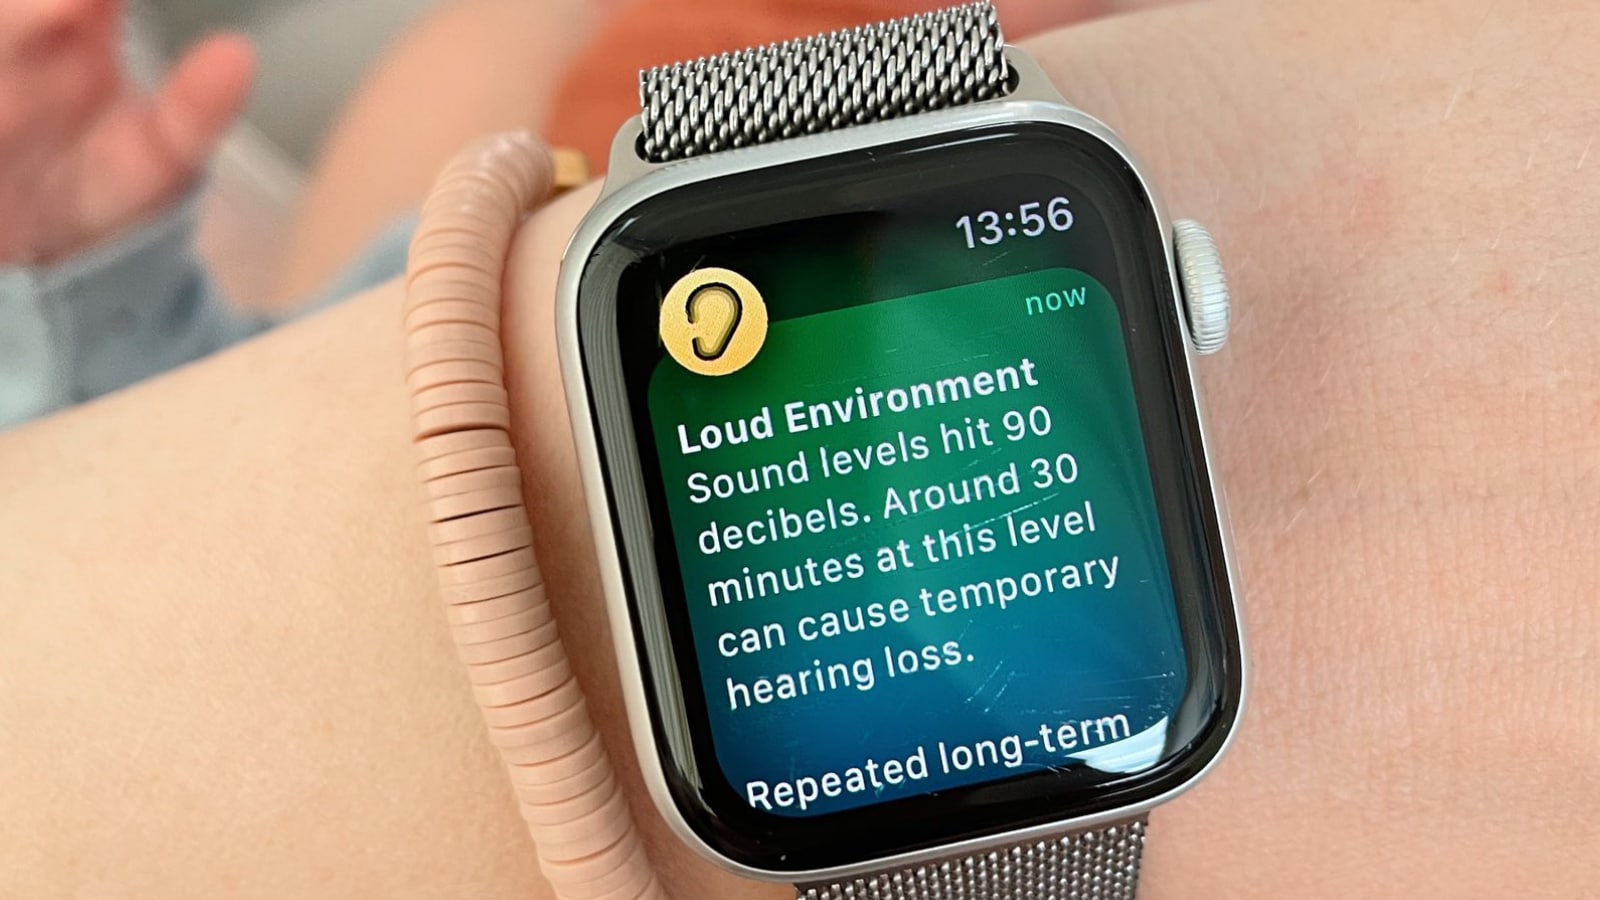 Apple Watch Alerts Woman of 'Loud Environment' Around Her, Here's What